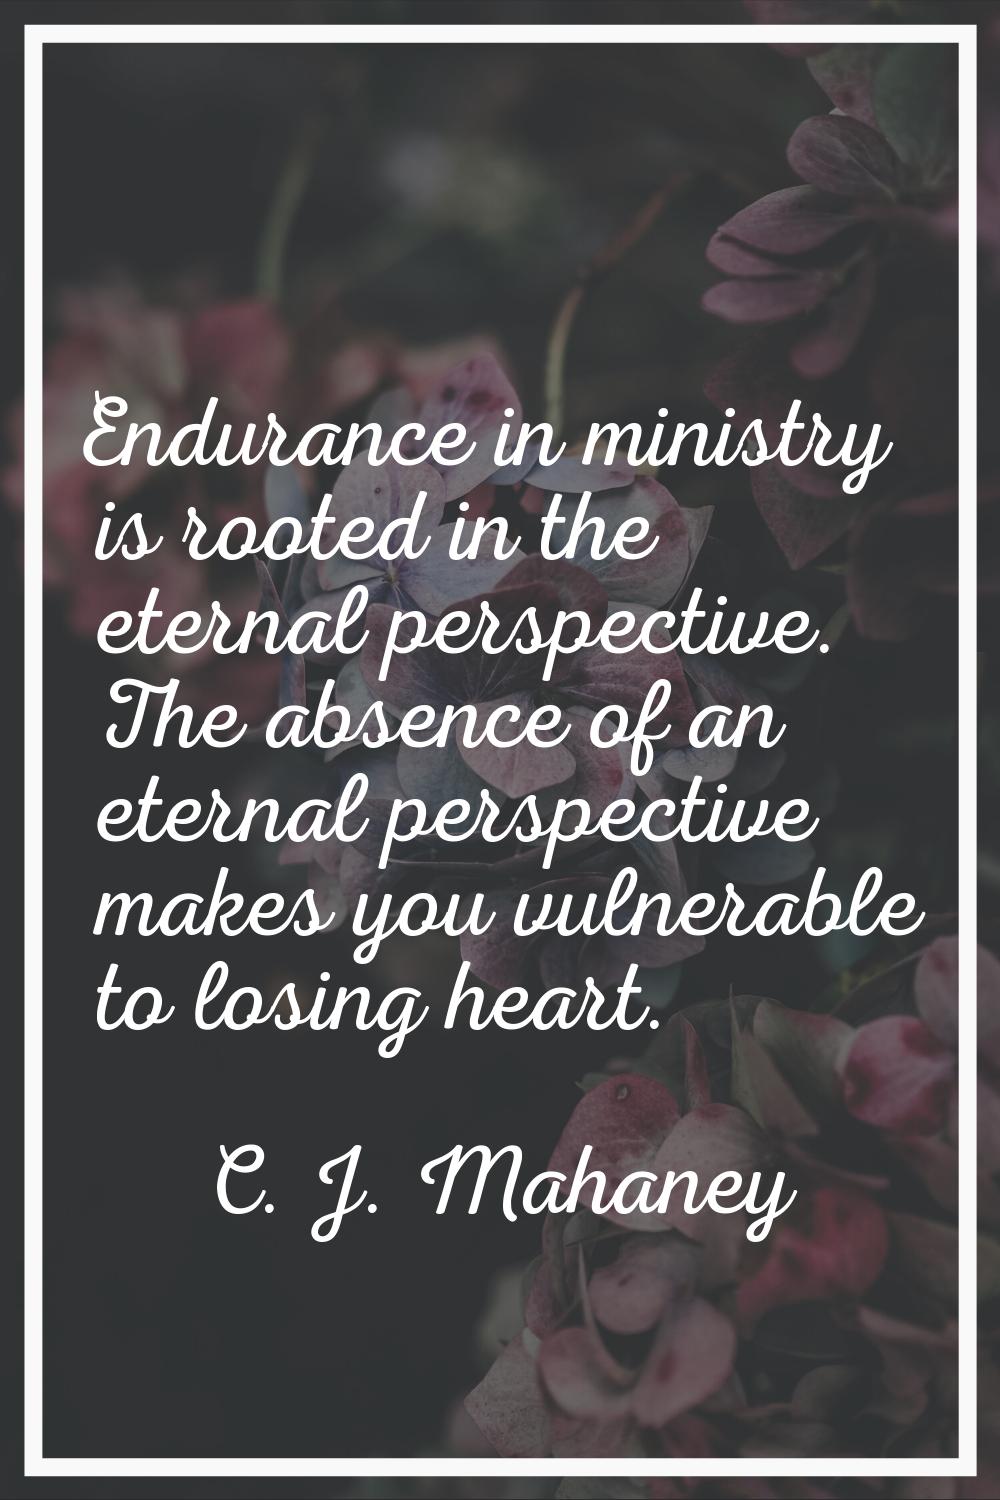 Endurance in ministry is rooted in the eternal perspective. The absence of an eternal perspective m